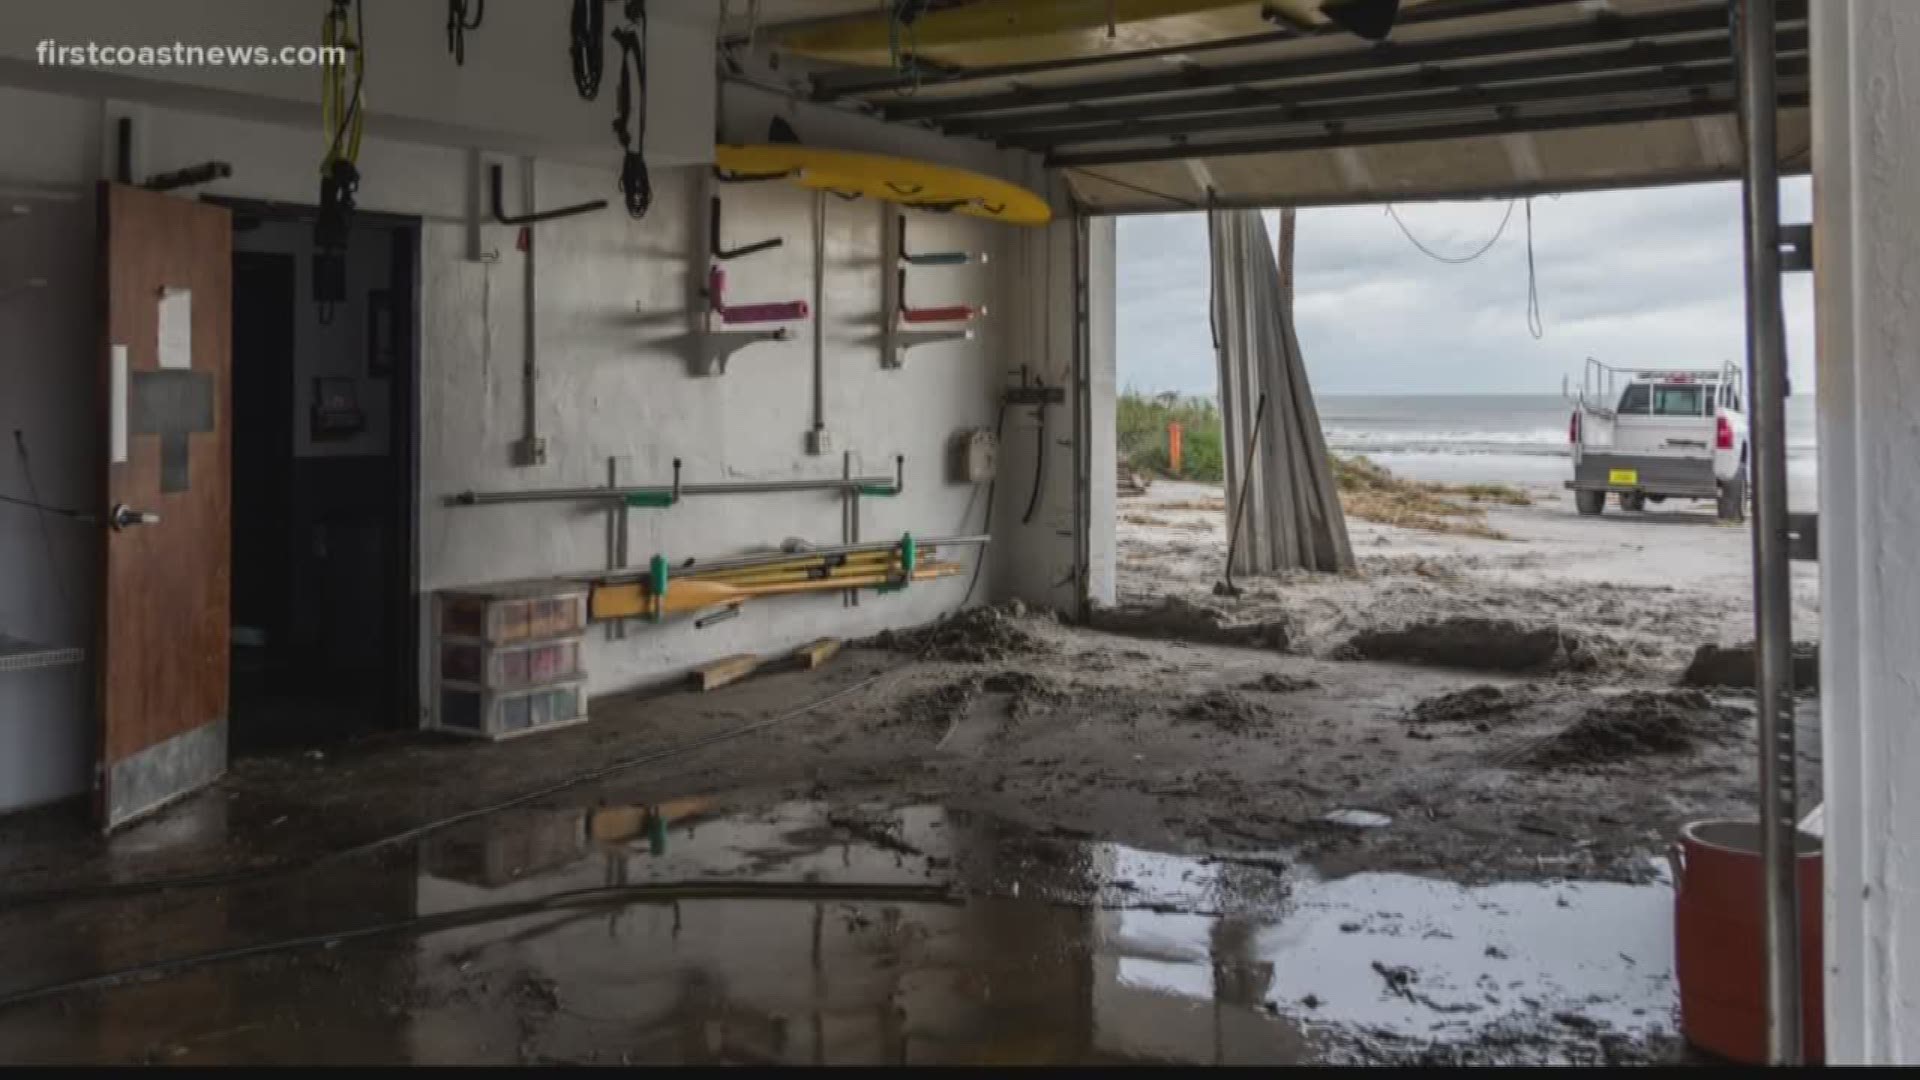 Several businesses sustained significant damage during the 2016 hurricane, including the Jacksonville Beach Pier.